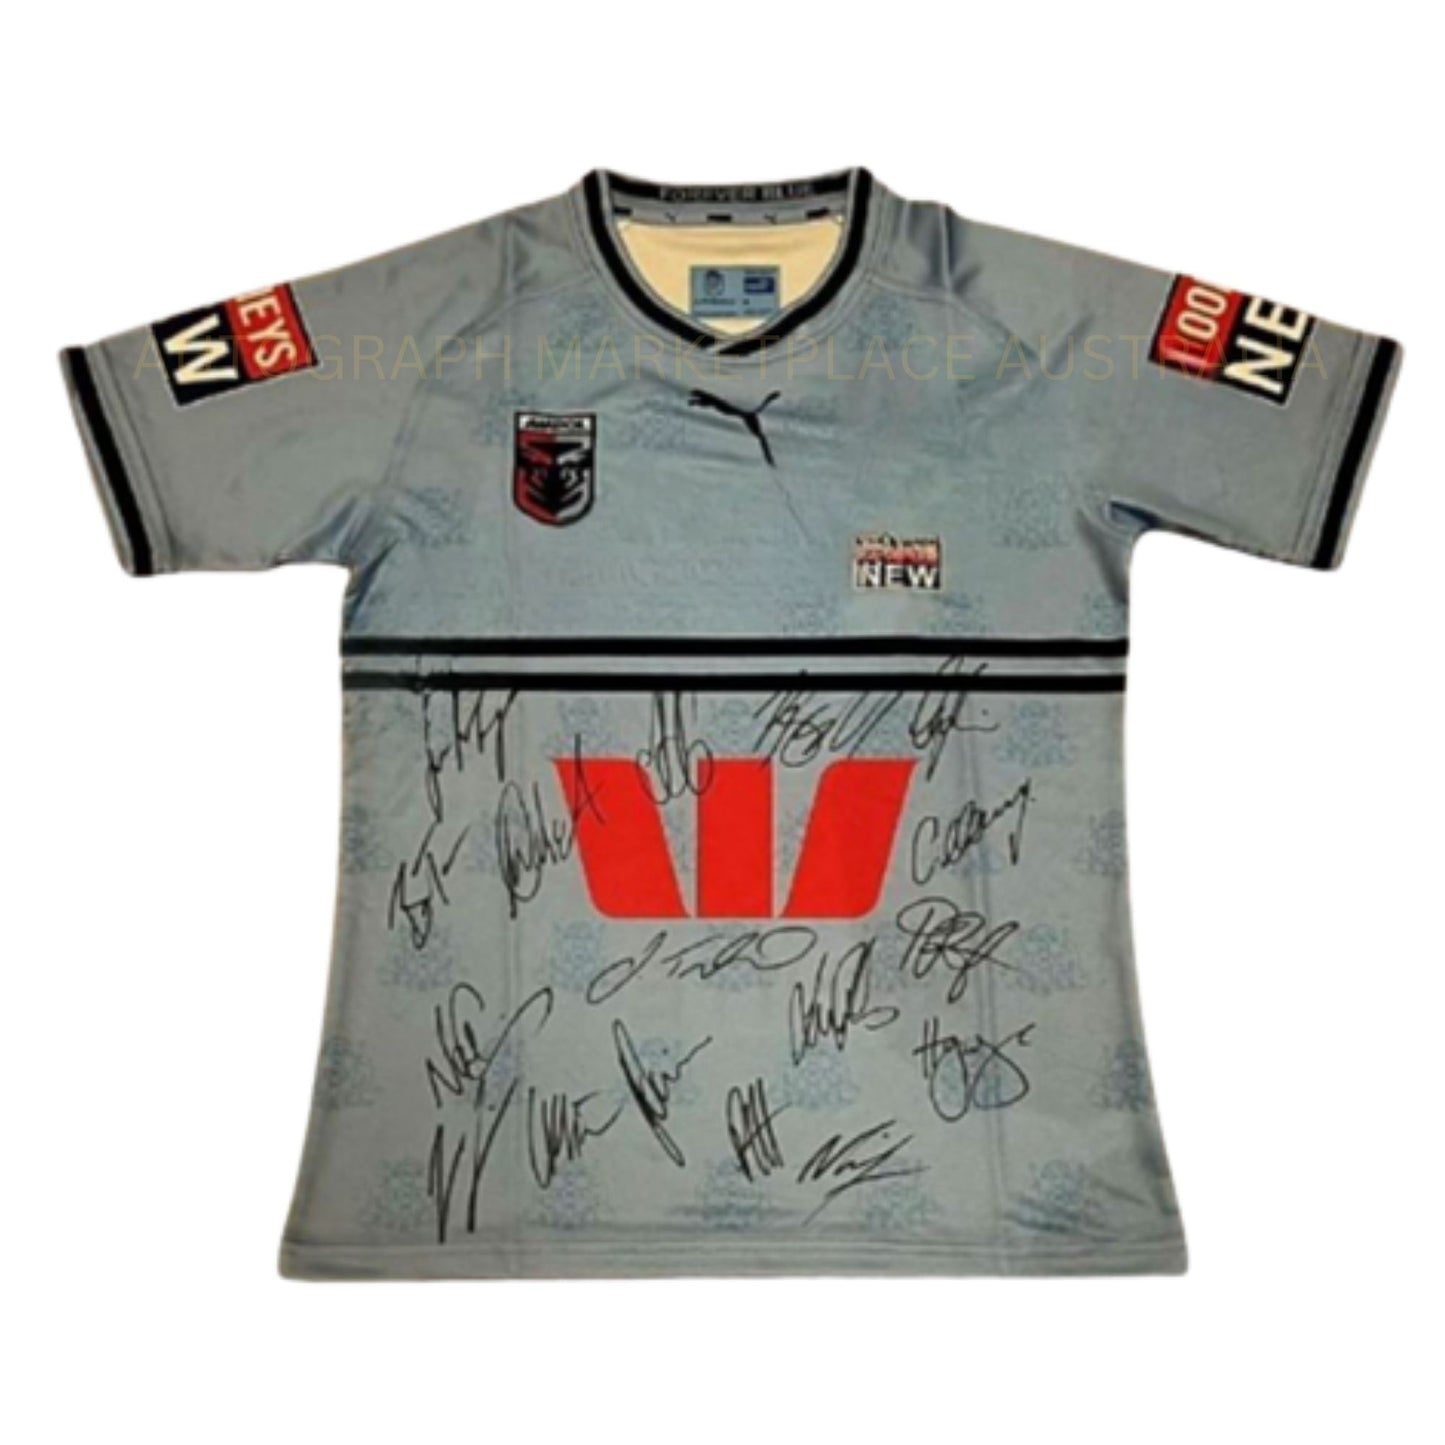 New South Wales Autographed/Signed NRL Jersey